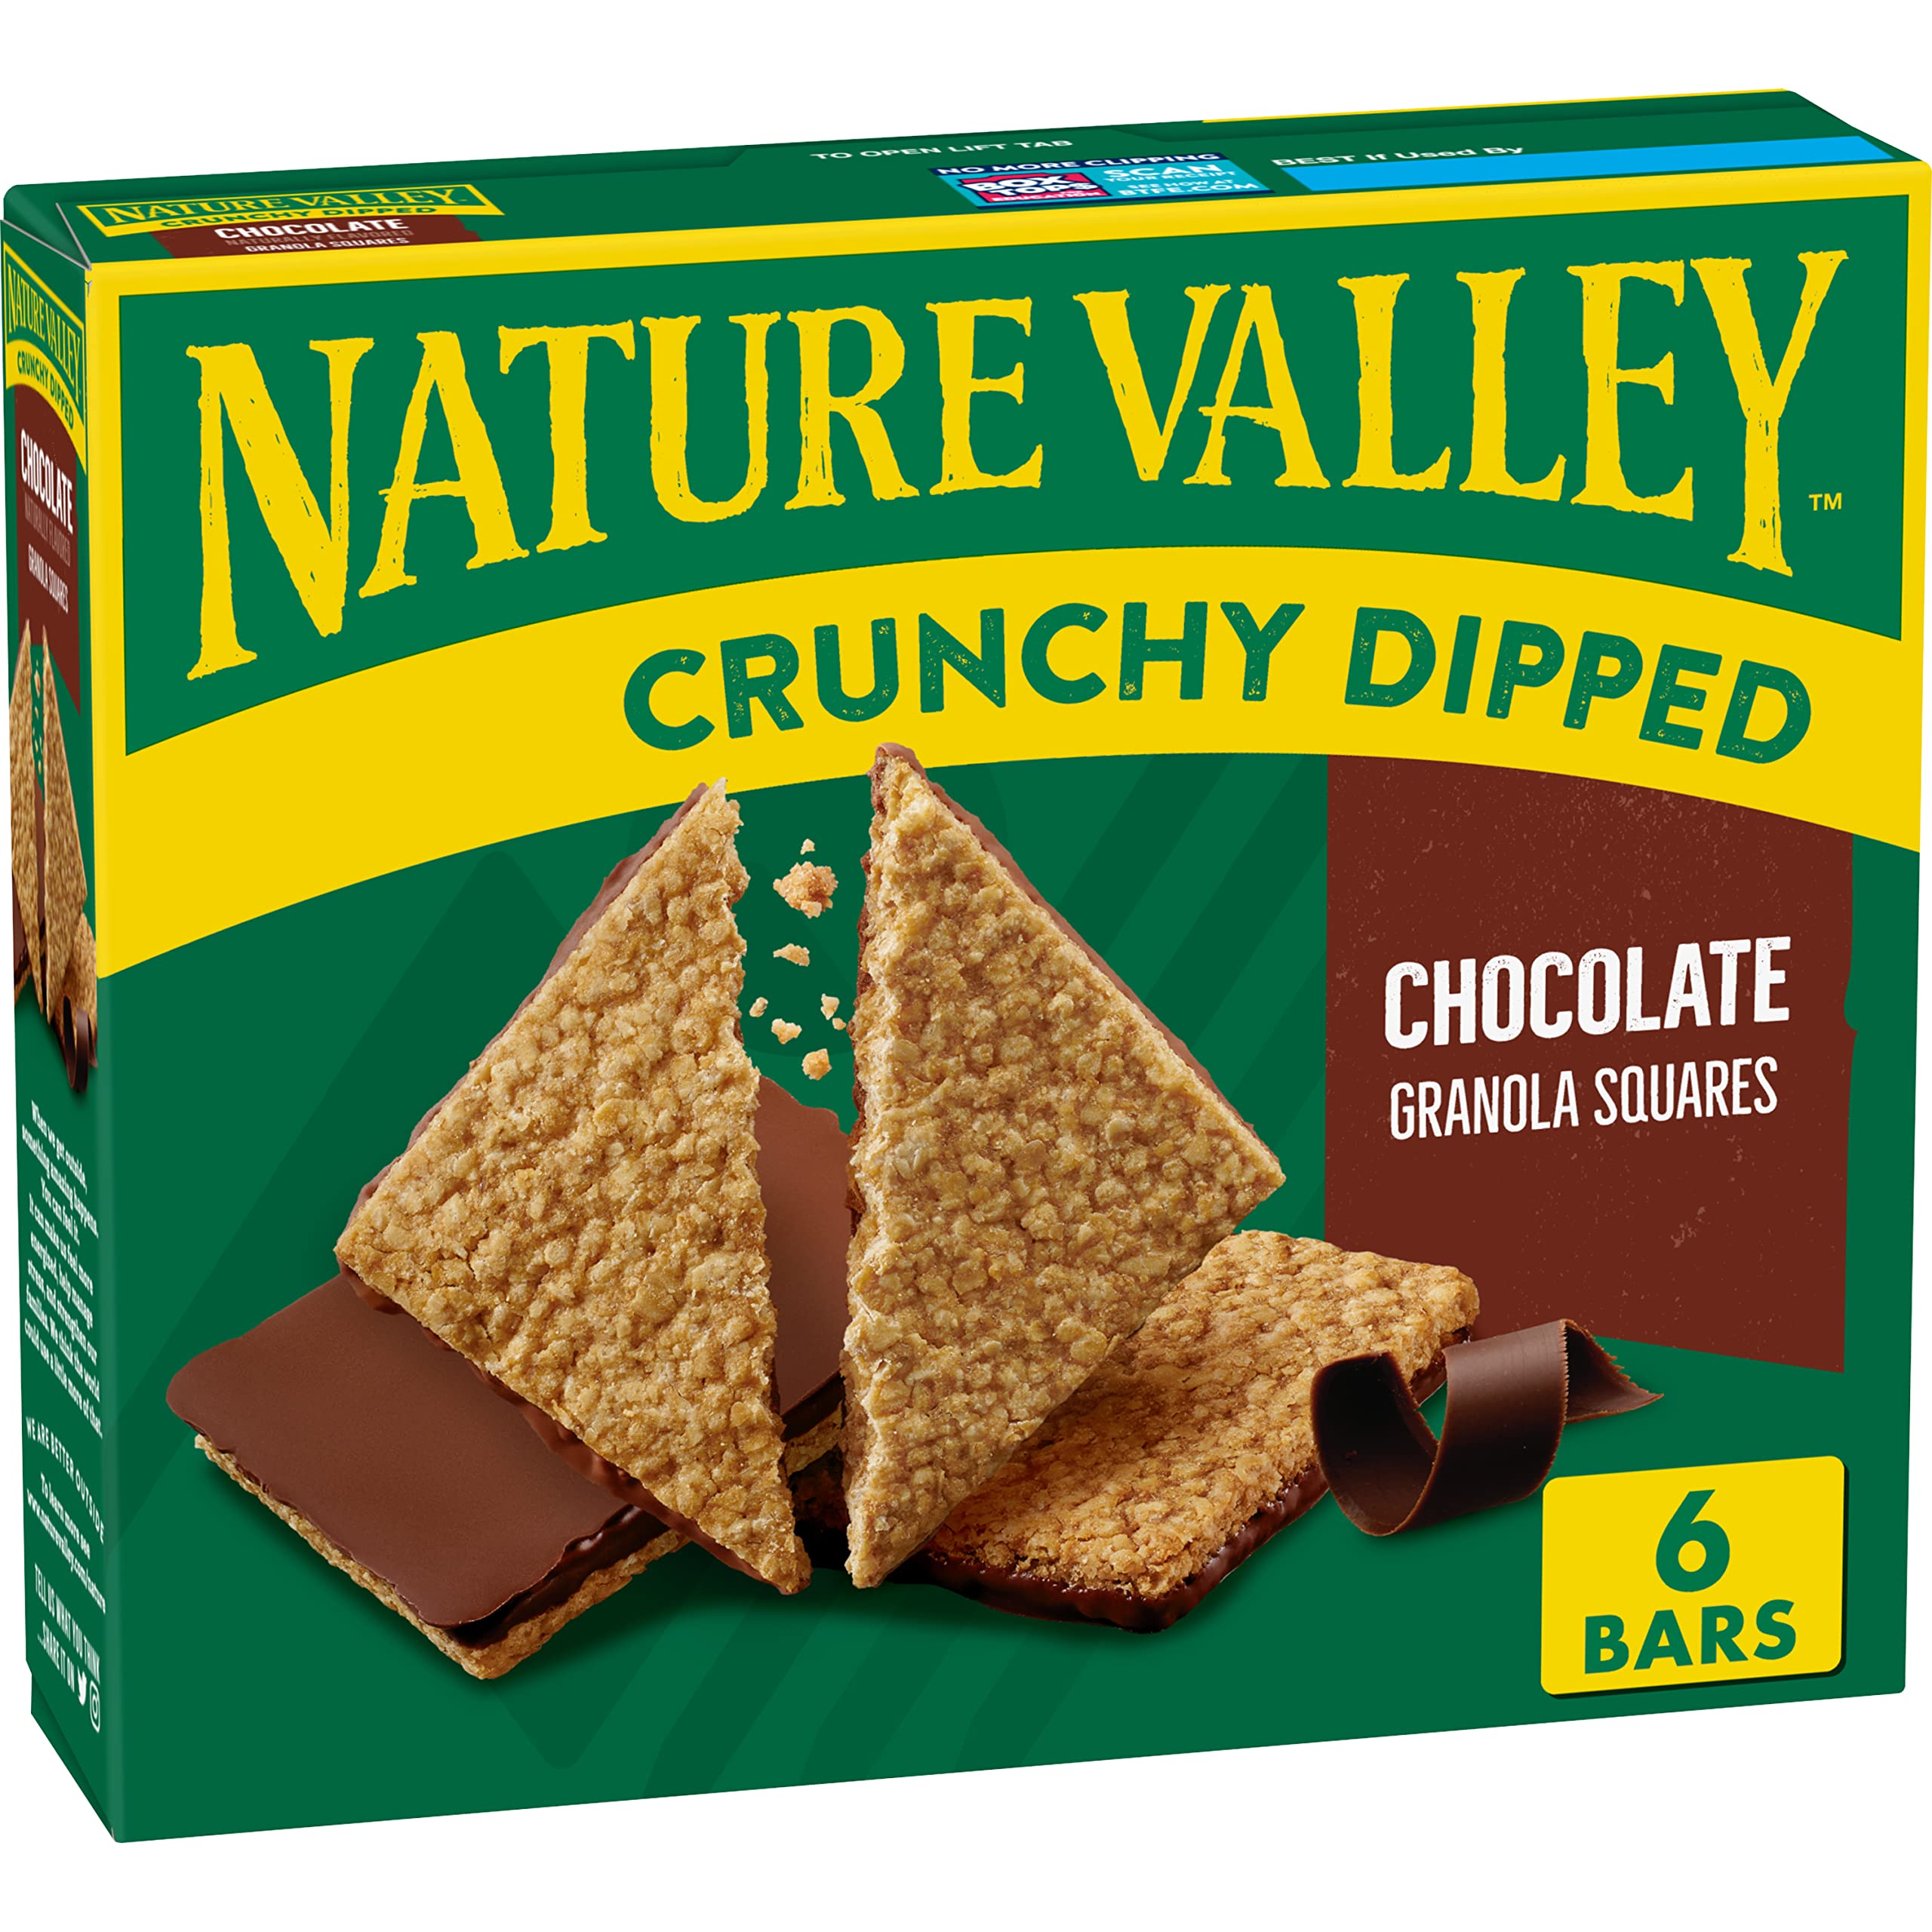 6 ct  Nature Valley Crunchy Dipped Granola Squares, Peanut Butter Chocolate or Oats and Chocolate, as low as $1.87 after 5% S&S and 29% coupon